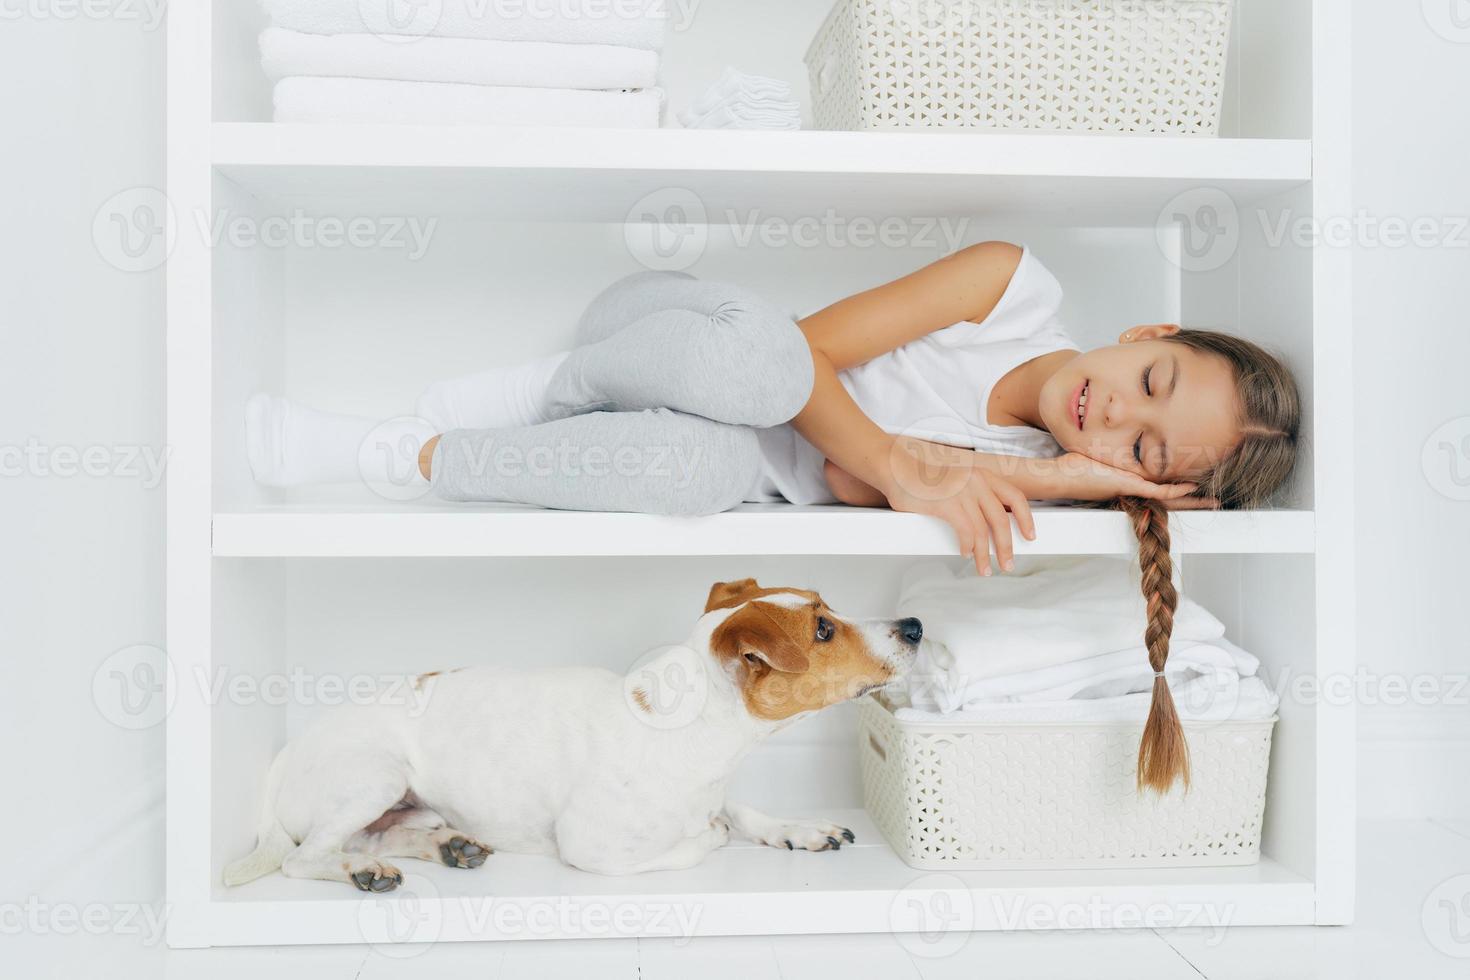 Sleepy little girl feels comfortable as lies on white shelf dressed in casual clothing tired after washing her dog looks attentively. White color. Kid rests in laundry room, enjoys domestic atmosphere photo